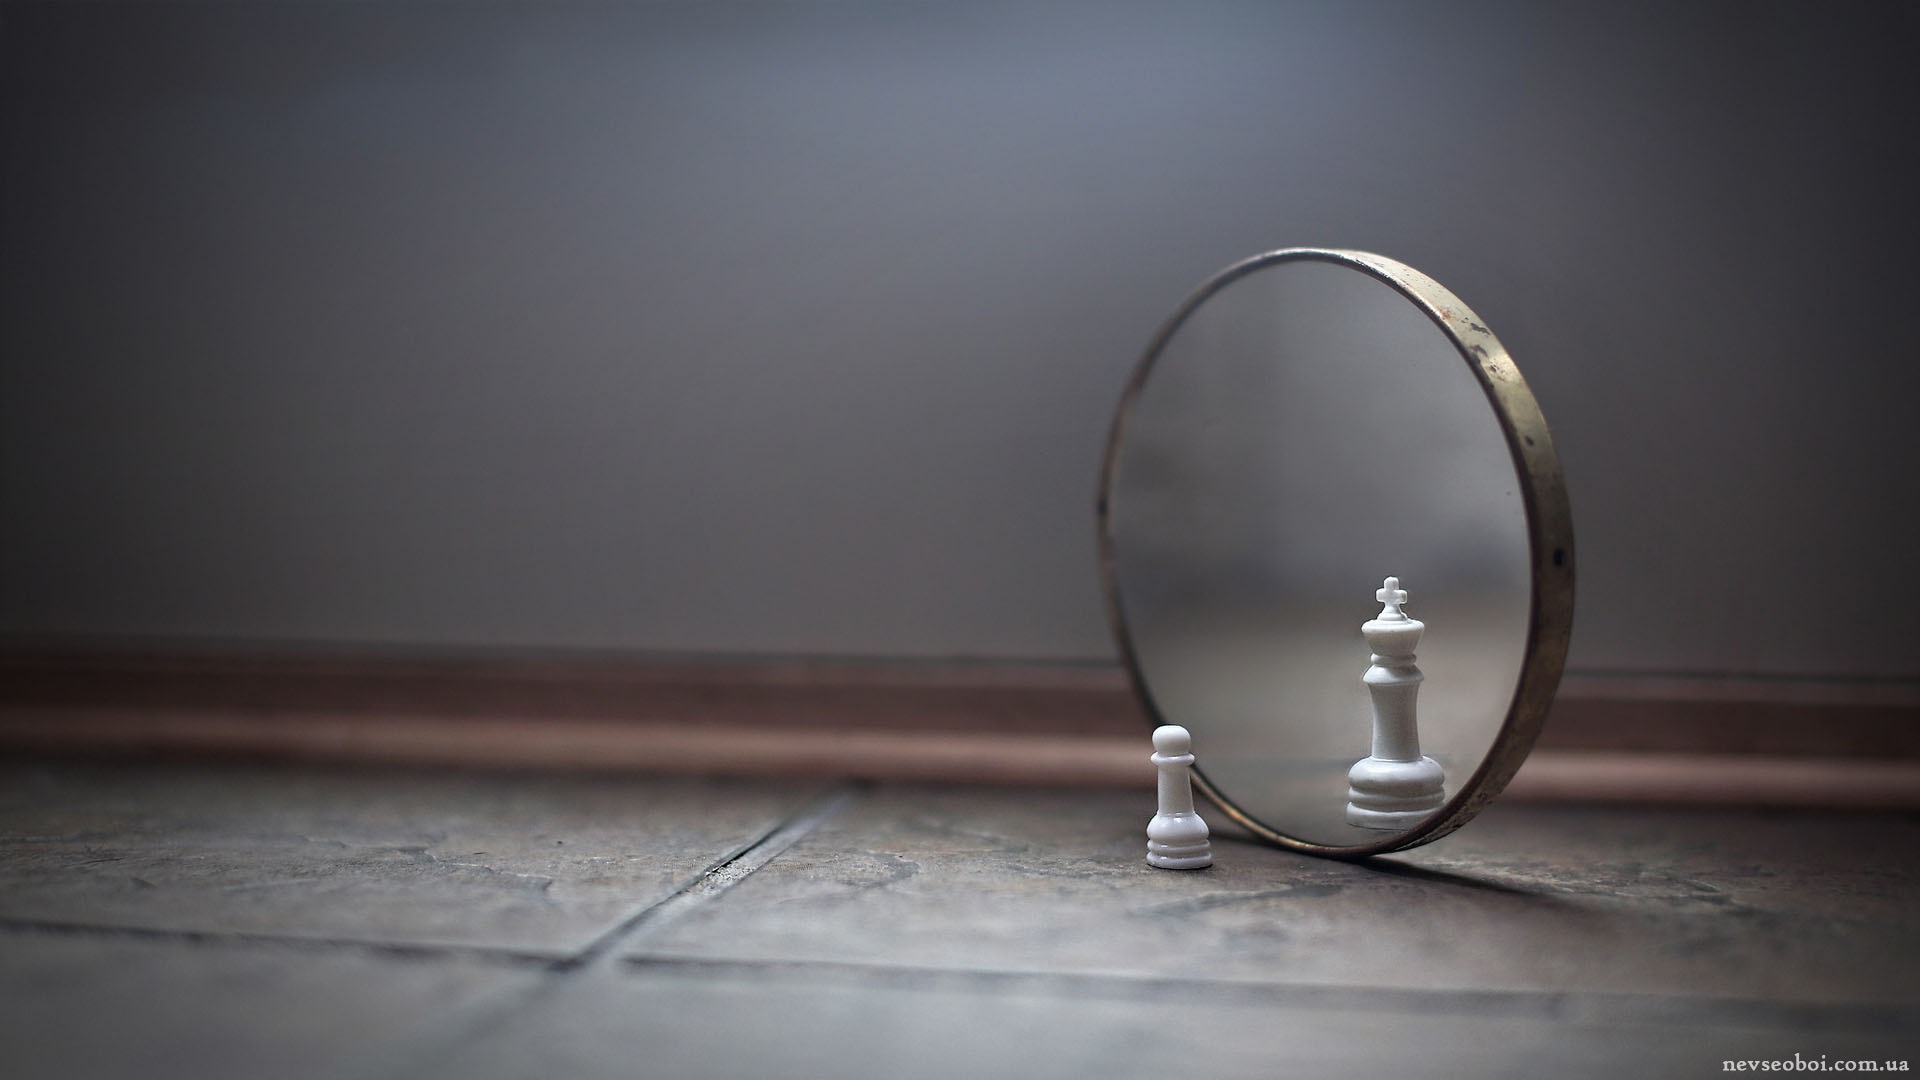 Ambition Photography Reflection Chess Mirror 1920x1080